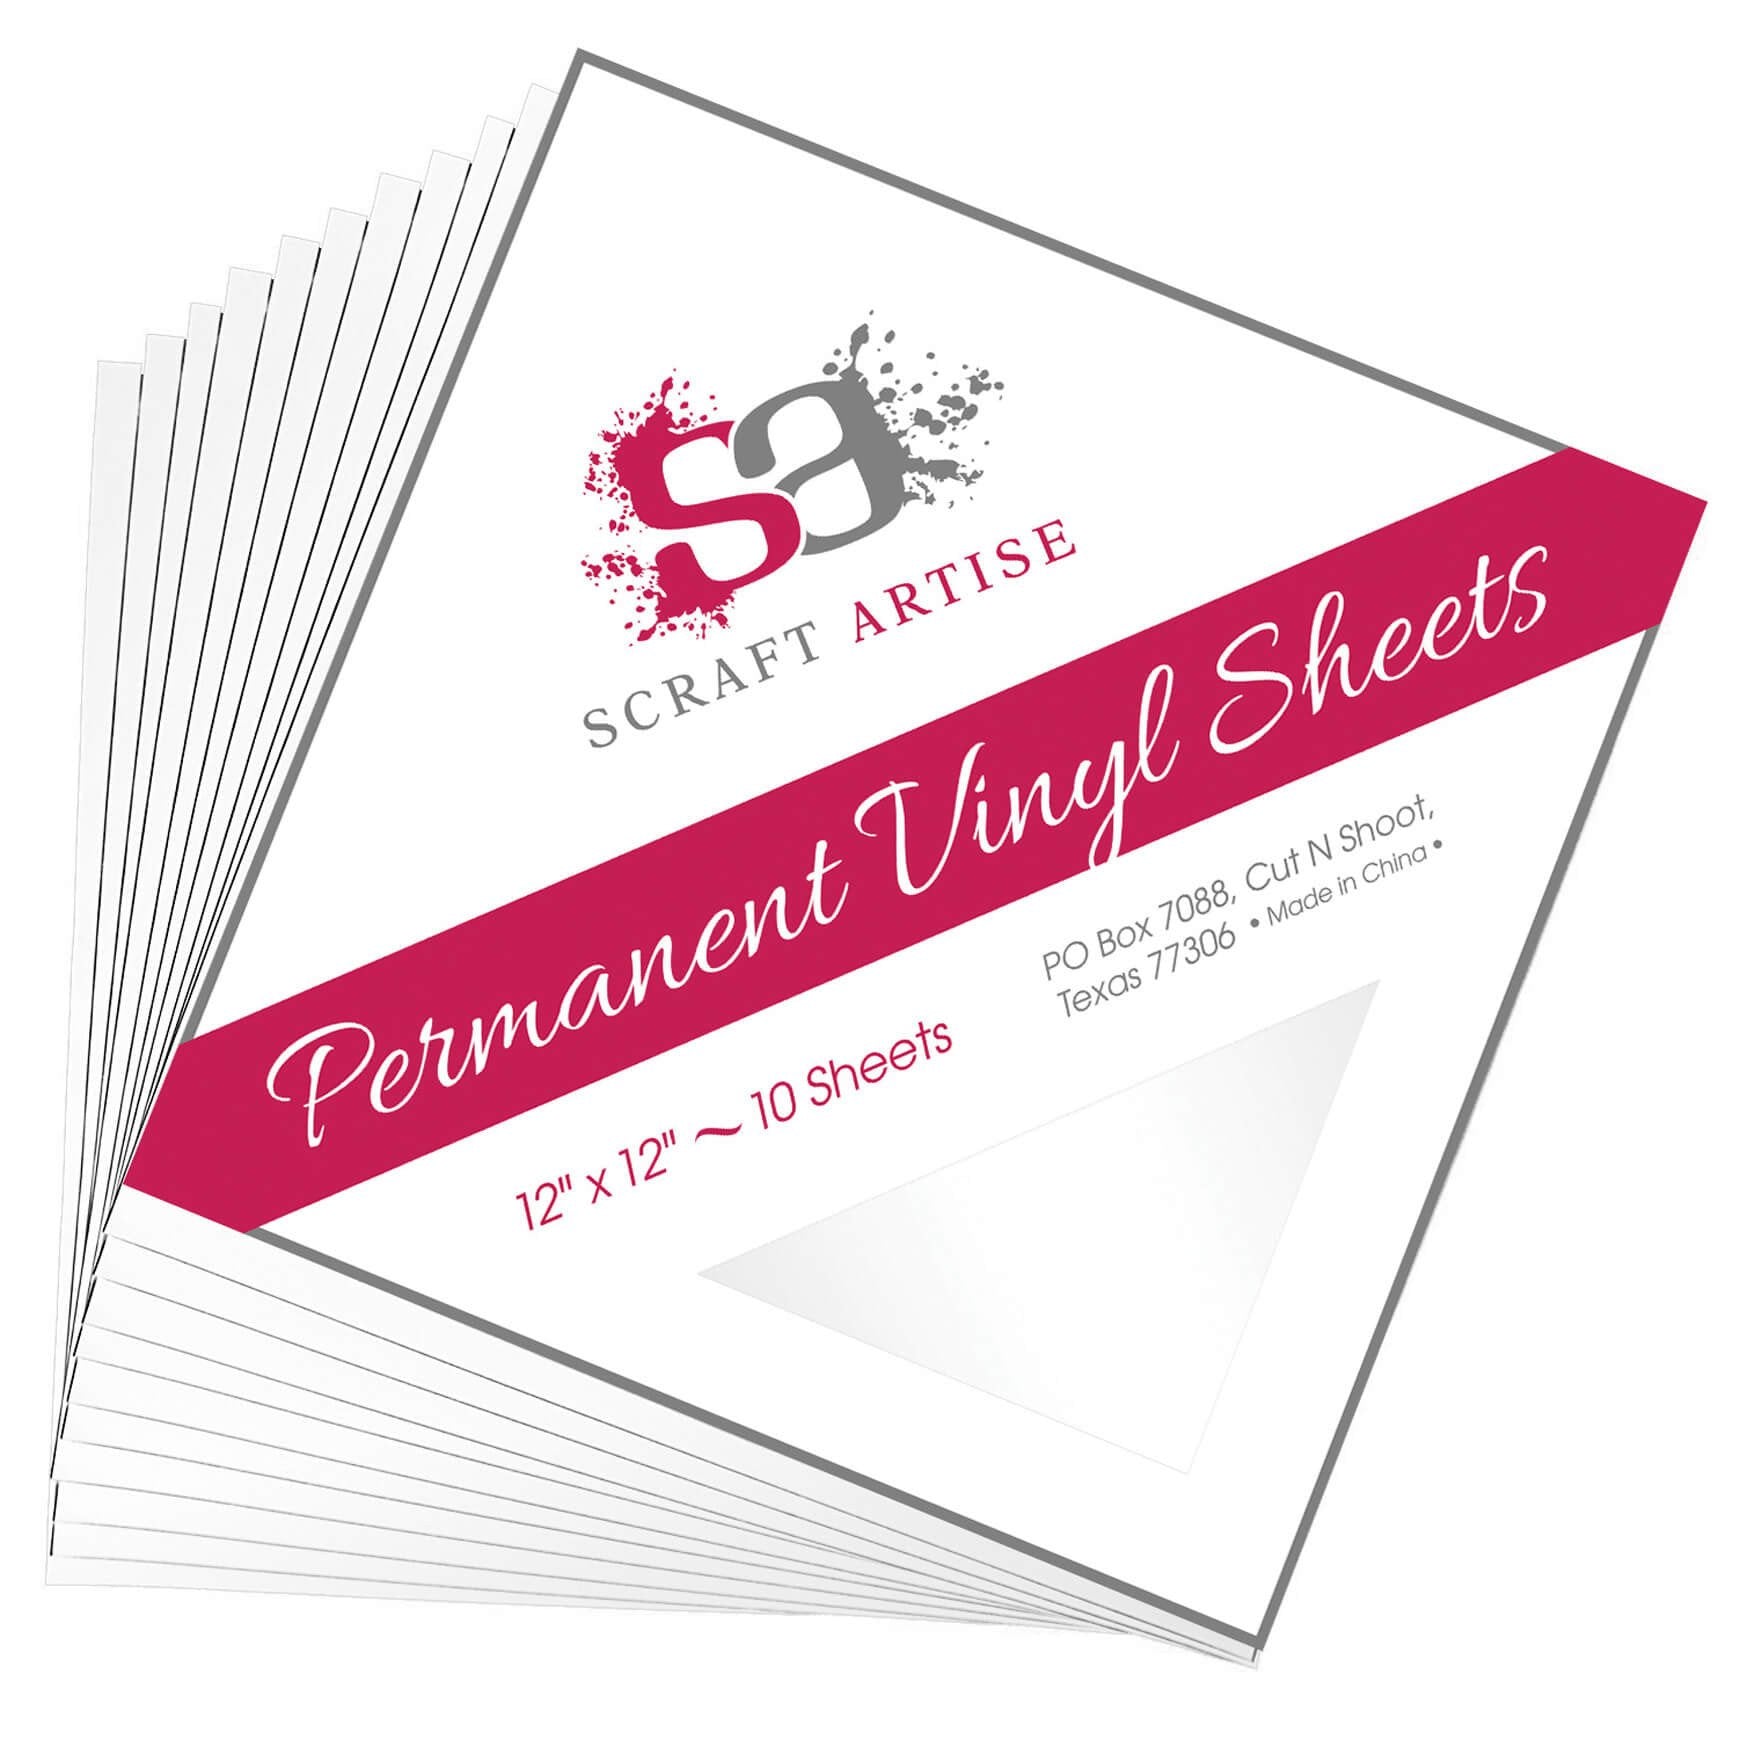 Scraft Artise White Glossy Permanent Adhesive Craft Vinyl 12 x 12 Sheets - 10 Pack